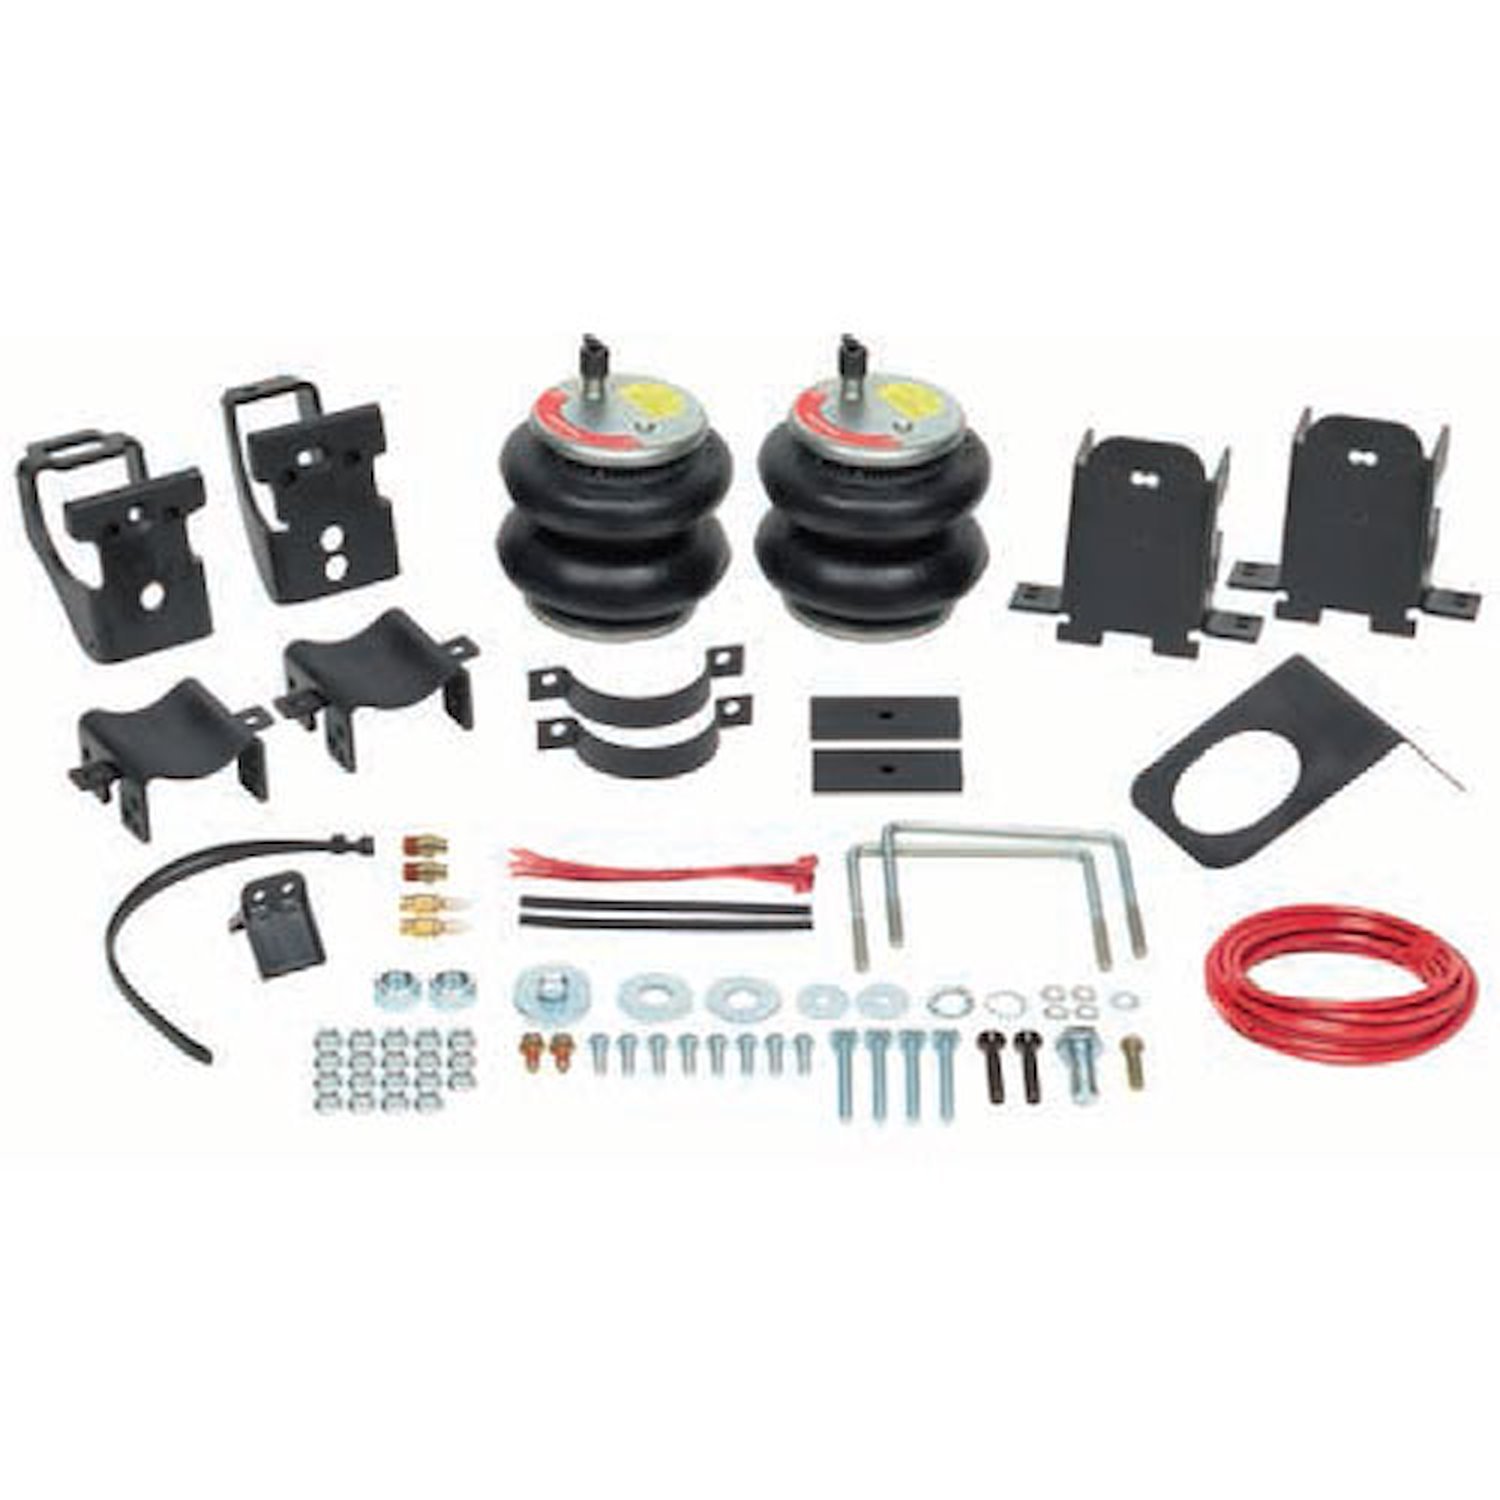 Ride-Rite Extreme Duty Air Spring Kit 2014-16 Dodge Ram 2500 2/4WD